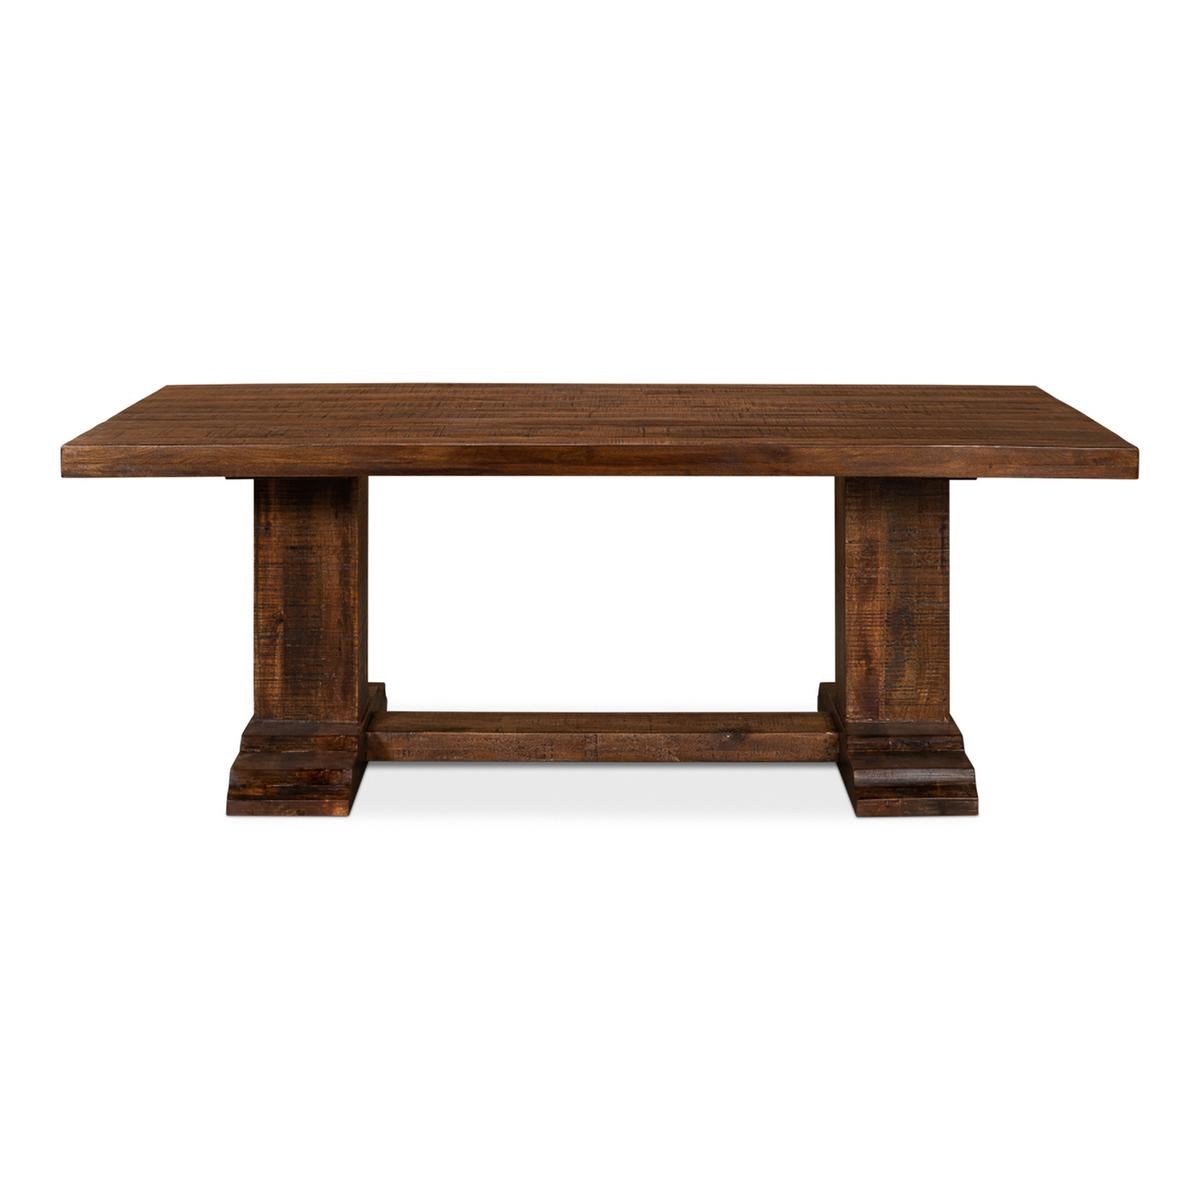 Industrial trestle end dining table. A bold and rustic design with a wide range of characteristics makes this a classic table option. Featuring grand scale and the rough-hewn elements of artisanal craftsmanship, this table easily moves from formal